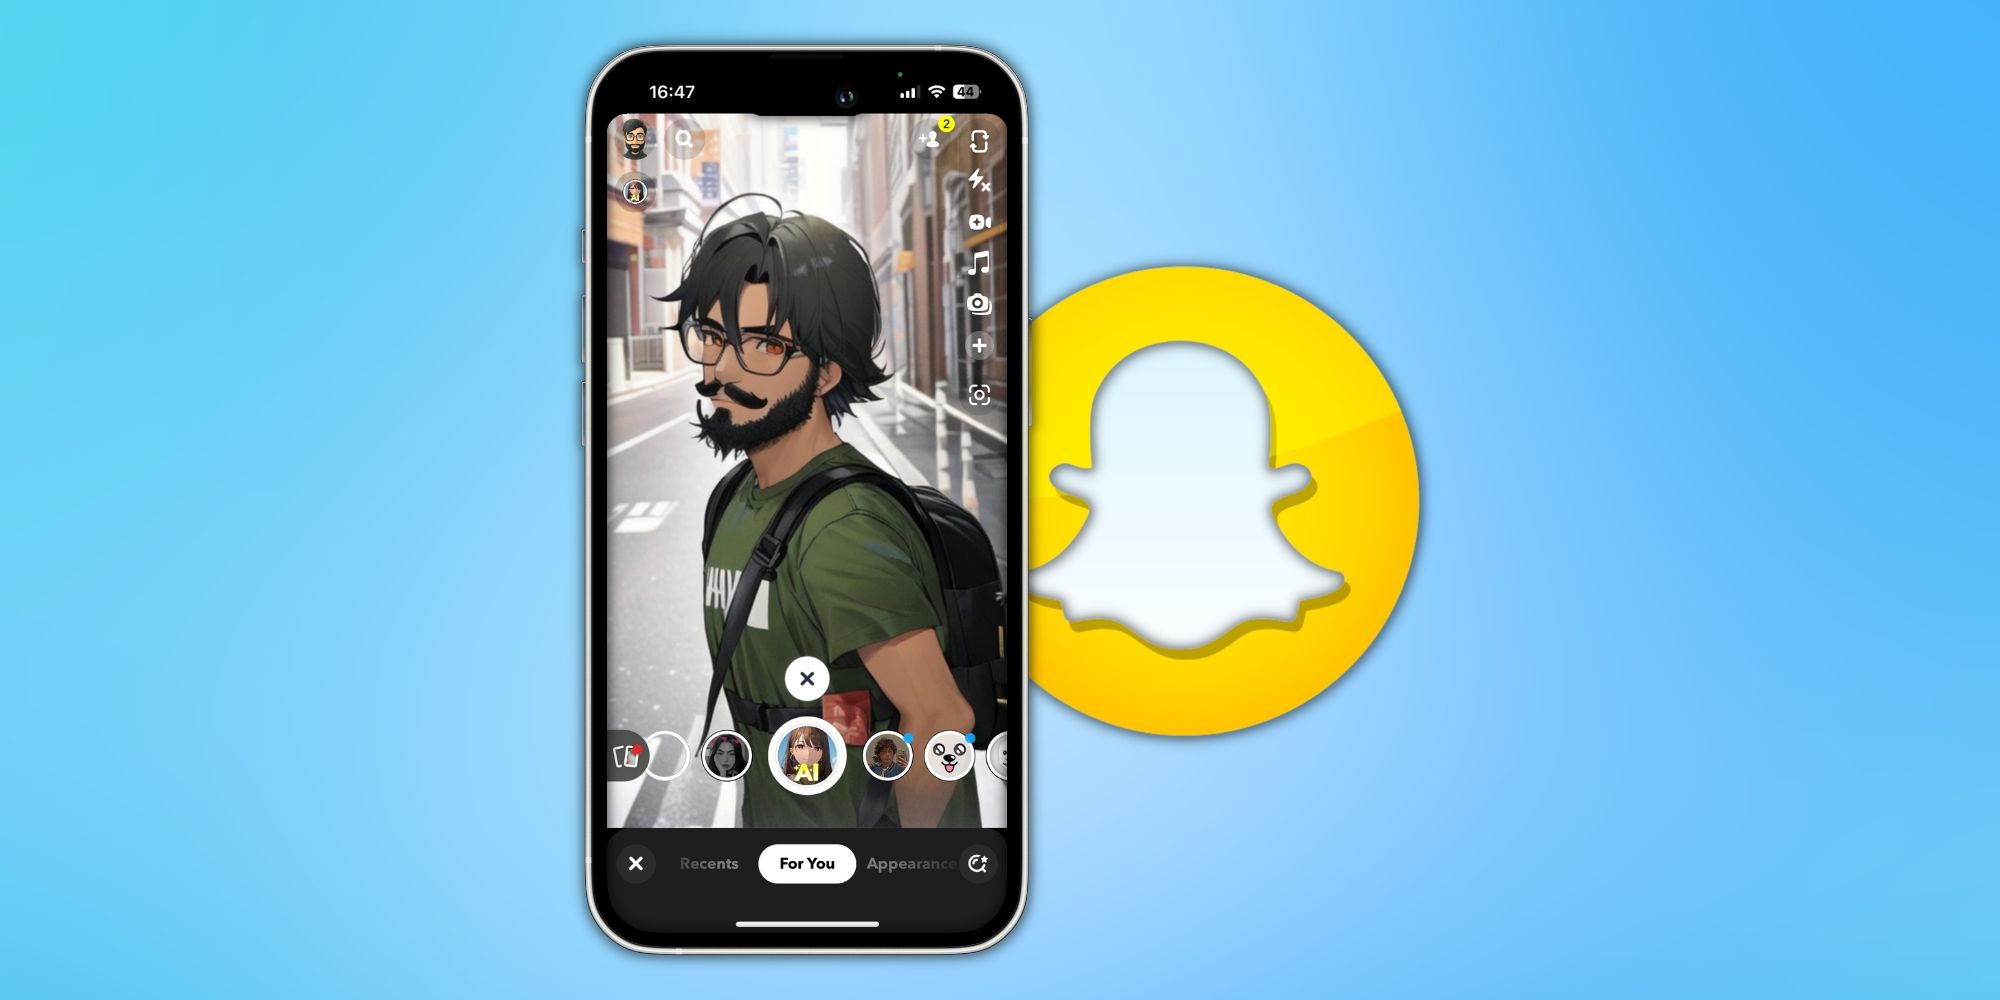 How to get Anime Style filter on snapchat - YouTube